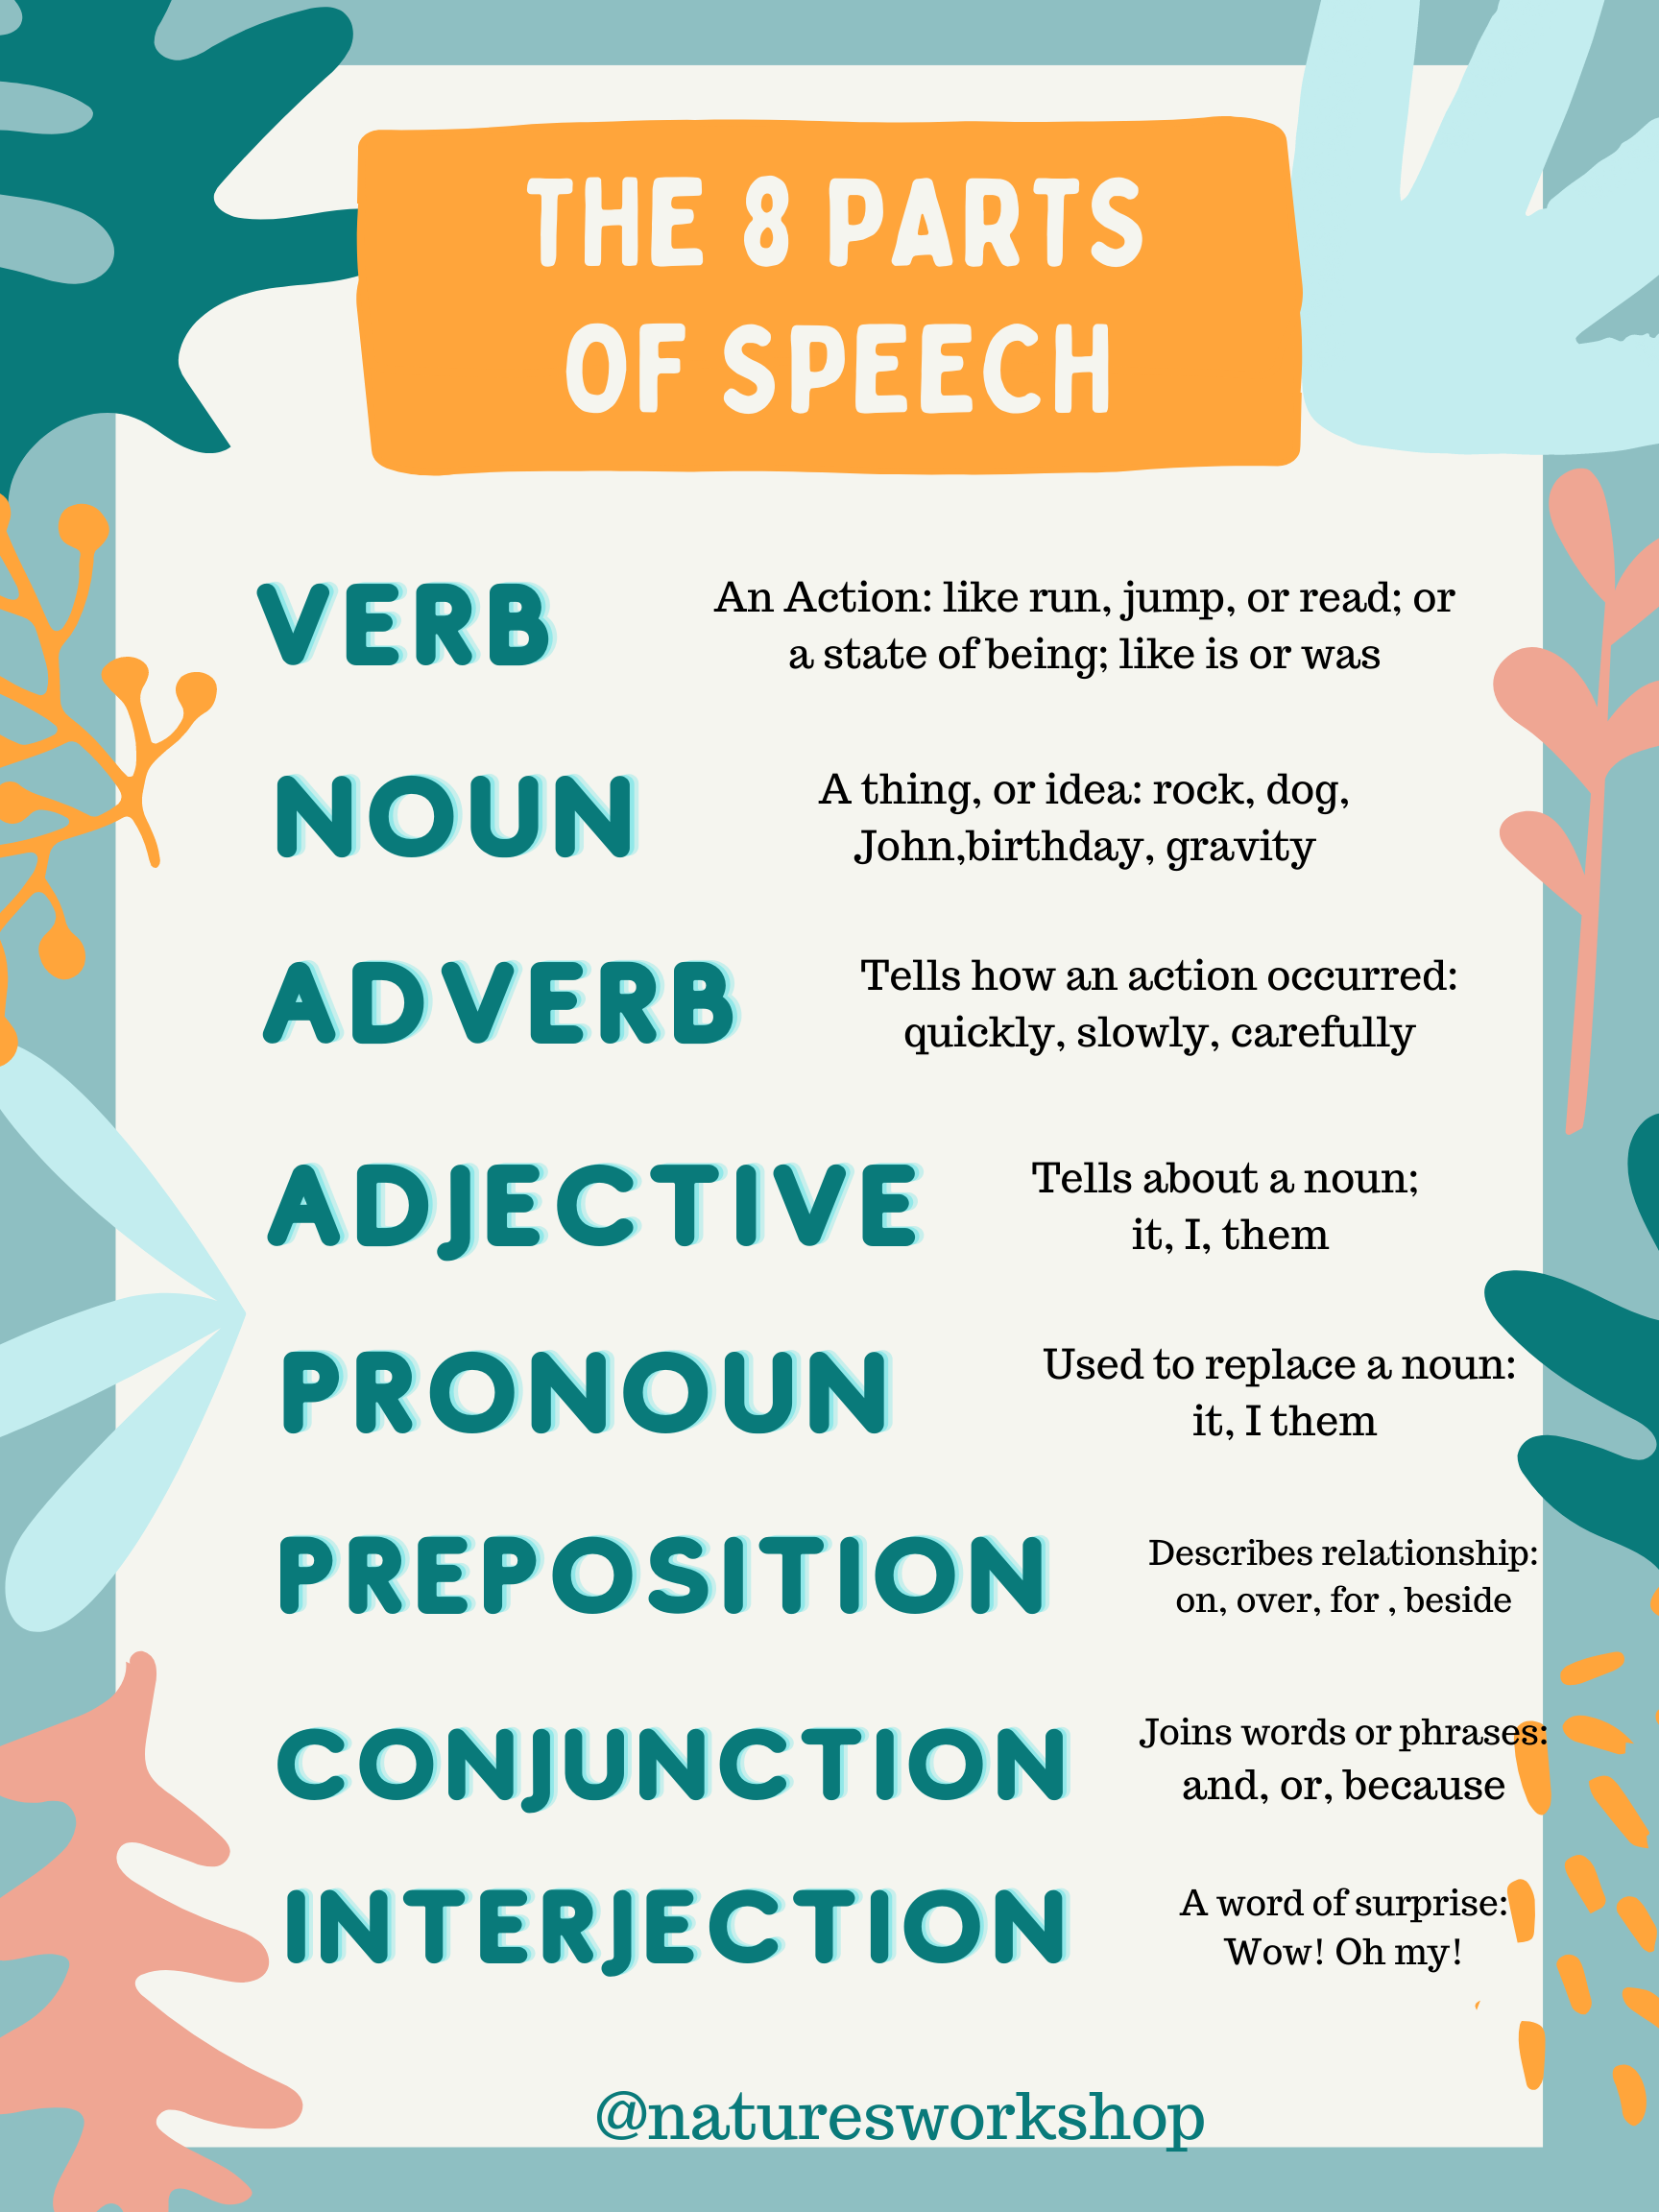 identify and define the 8 parts of speech